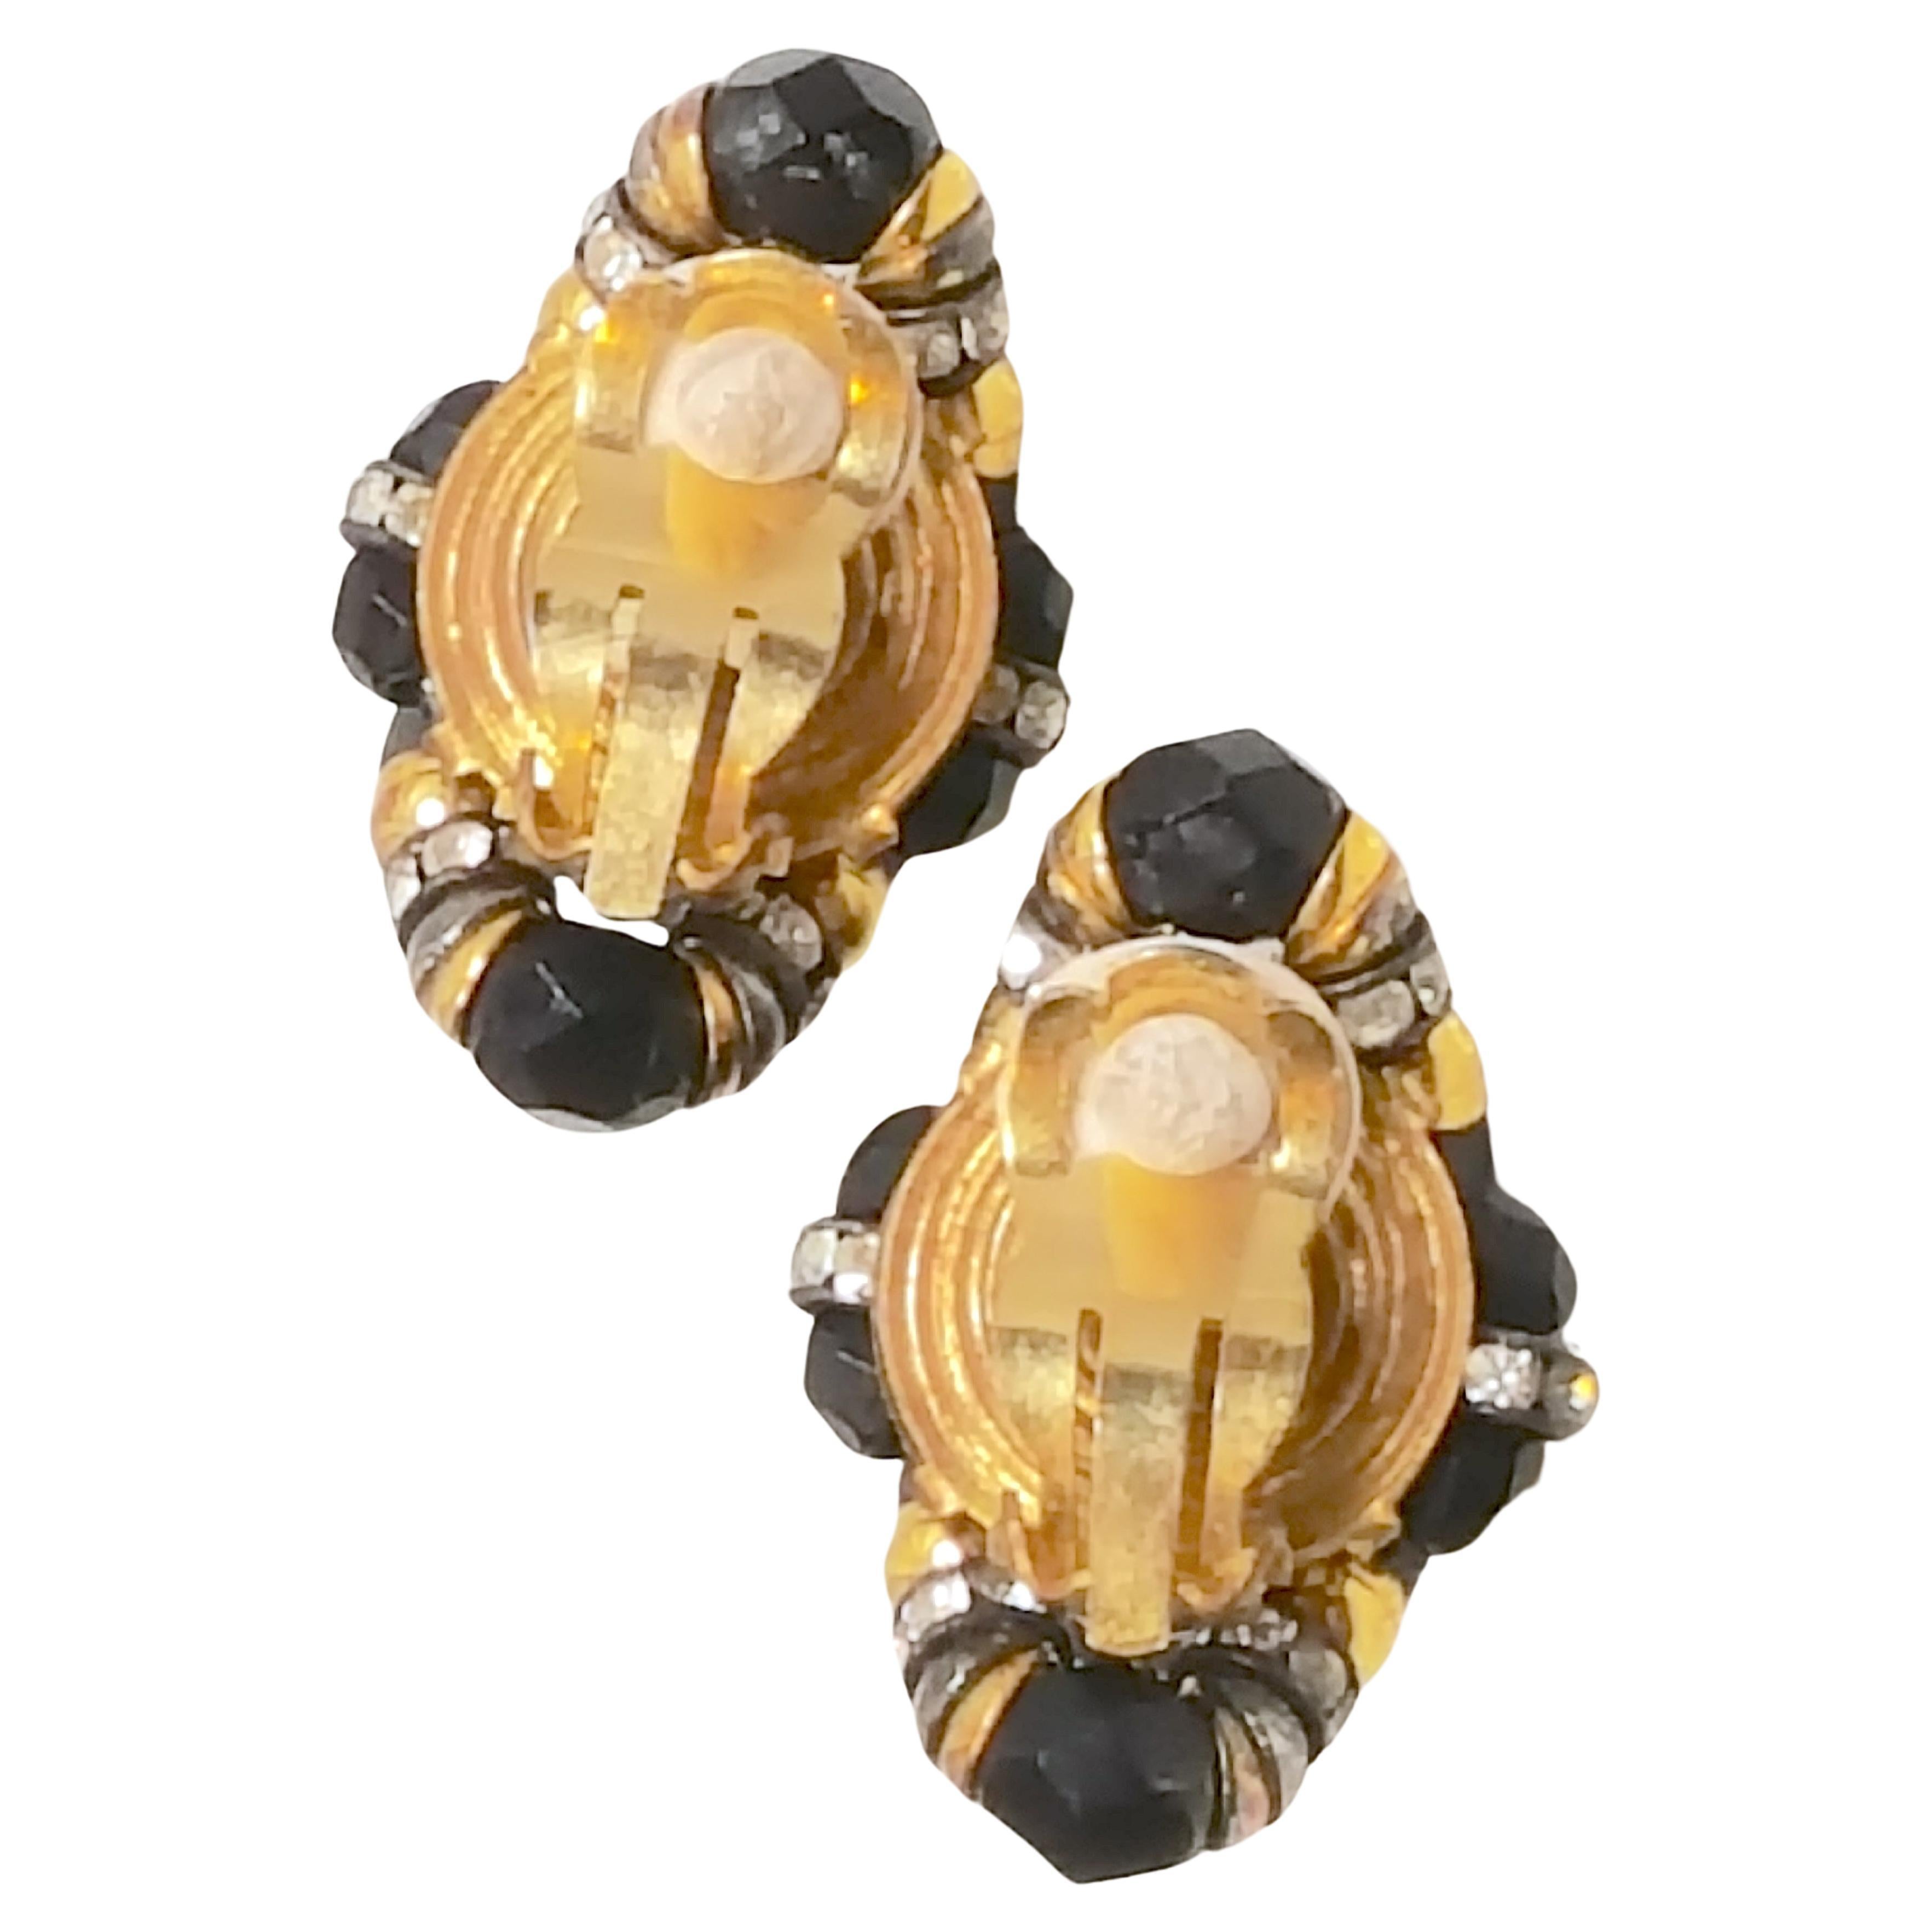 In the 1950s while he operated an eponymous Parisian couture costume-jewelry boutique, Francoise Montague designed these unique handmade ornate pair of sparkly clip earrings featuring black faceted-glass beads, prong-set clear crystals,